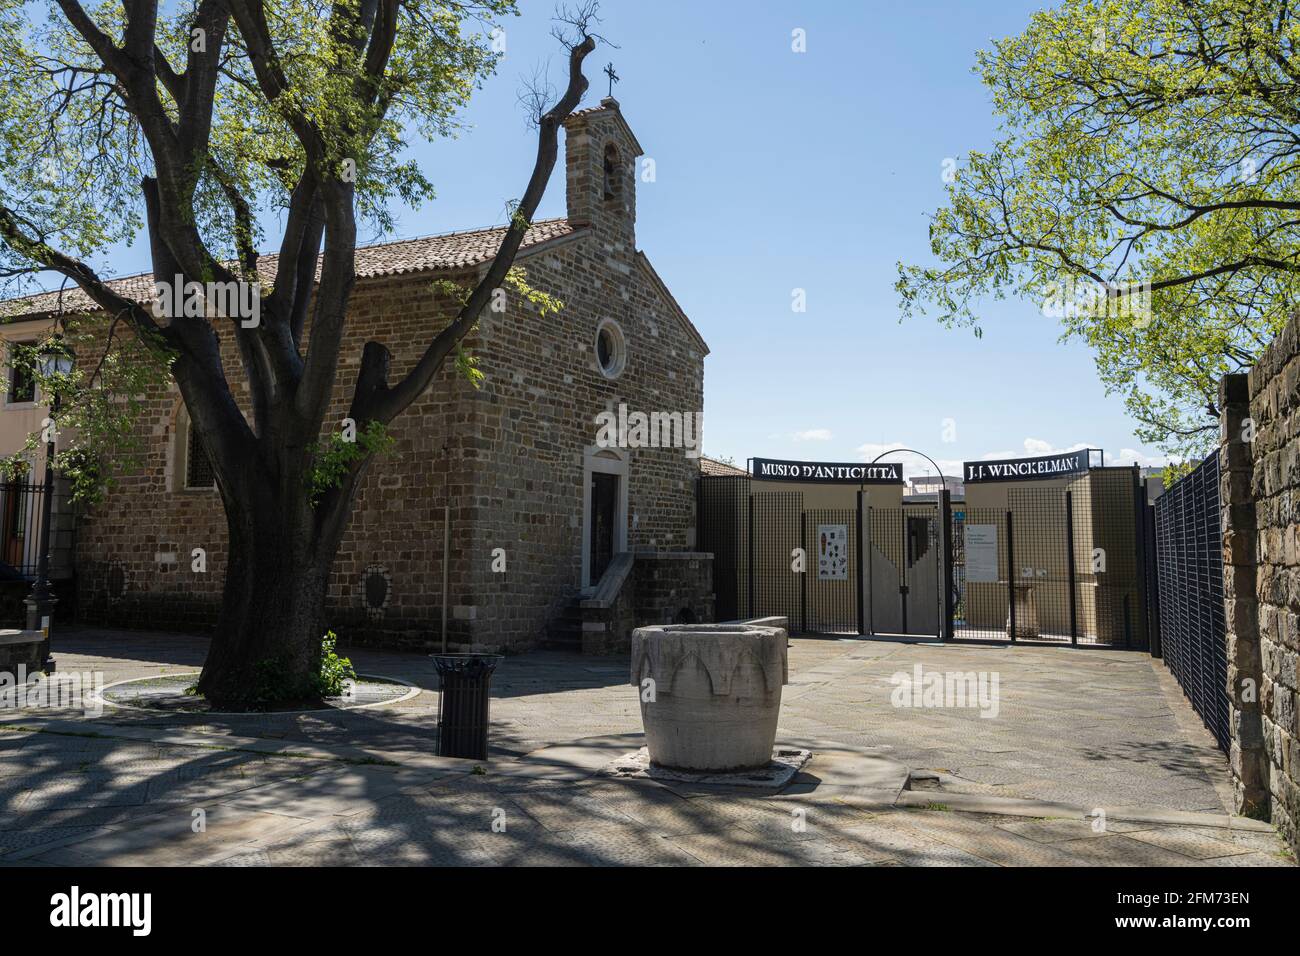 Trieste, Italy. May 3, 2021.  The external view of the Rectory and oratory of San Michele al Carnale church in Trieste Stock Photo